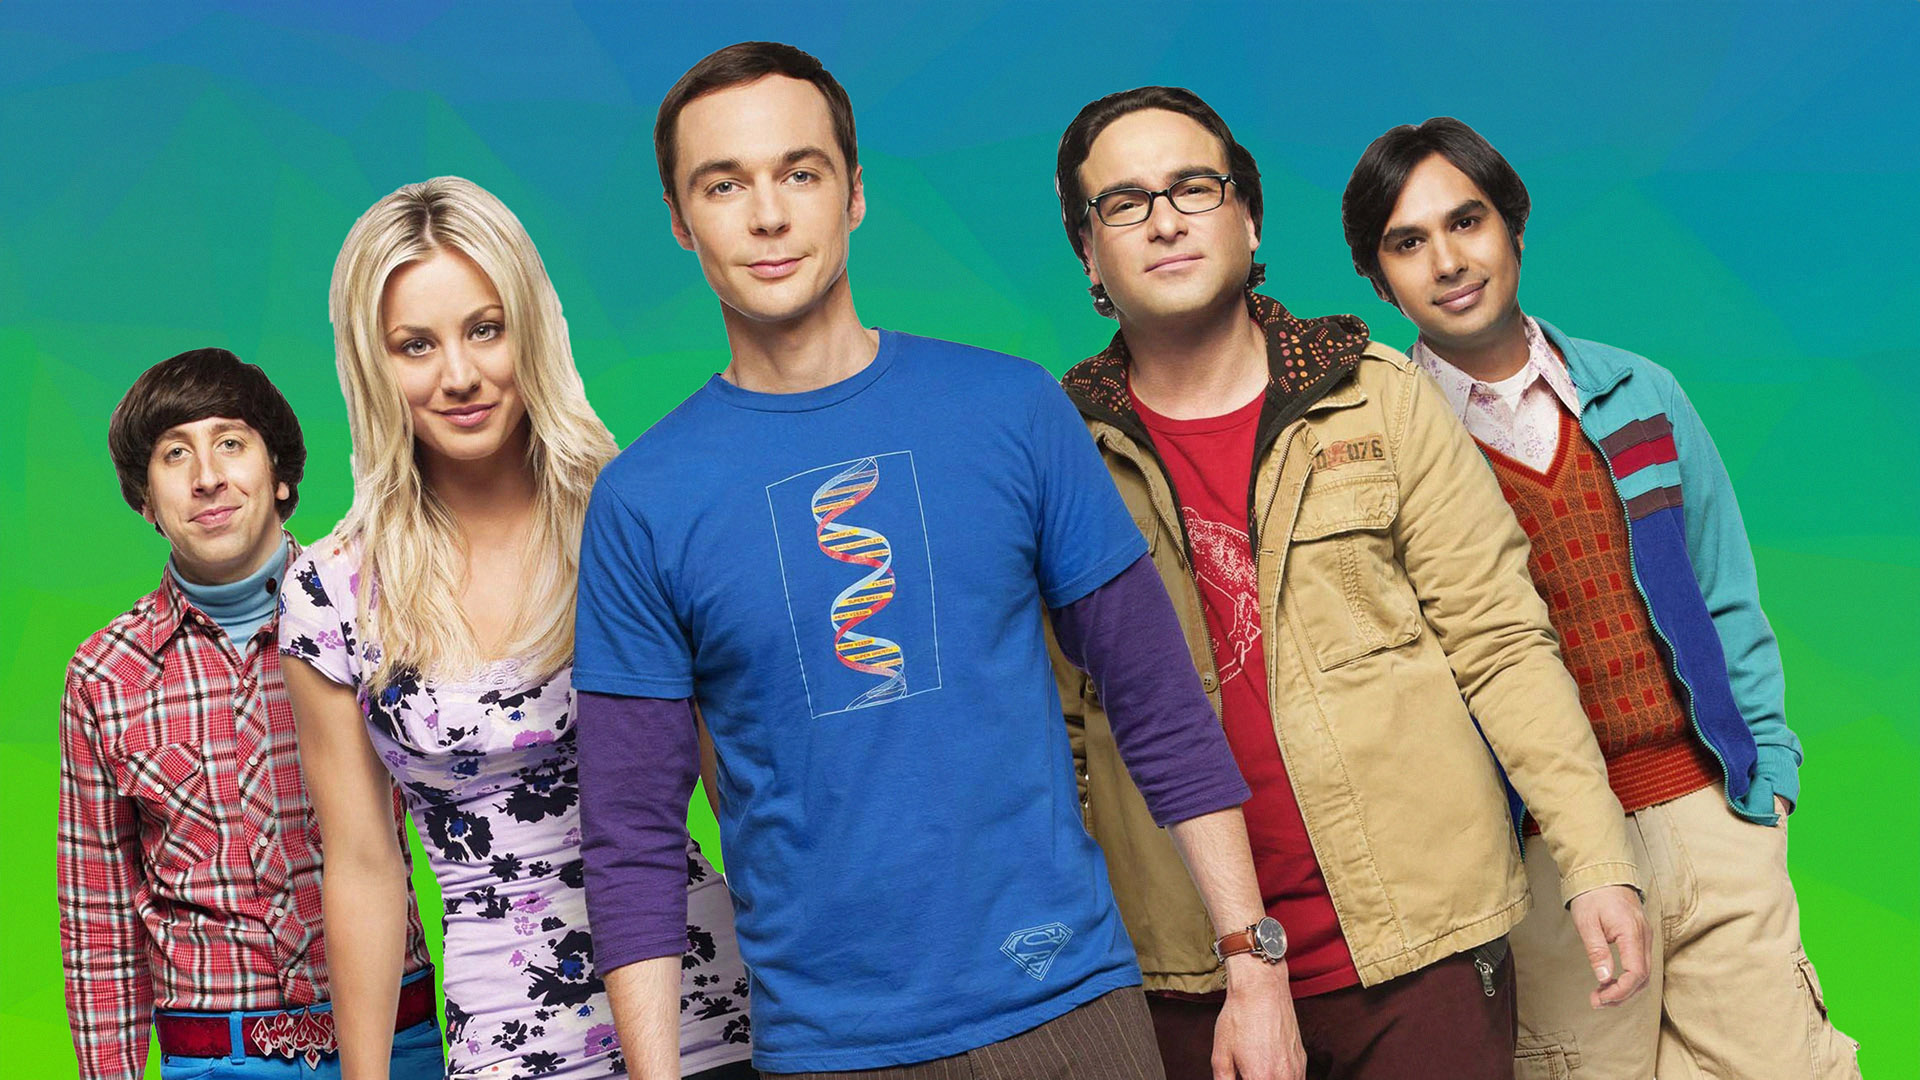 Big Bang Theory Had to Made 3 Major Changes After Questionable Pilot